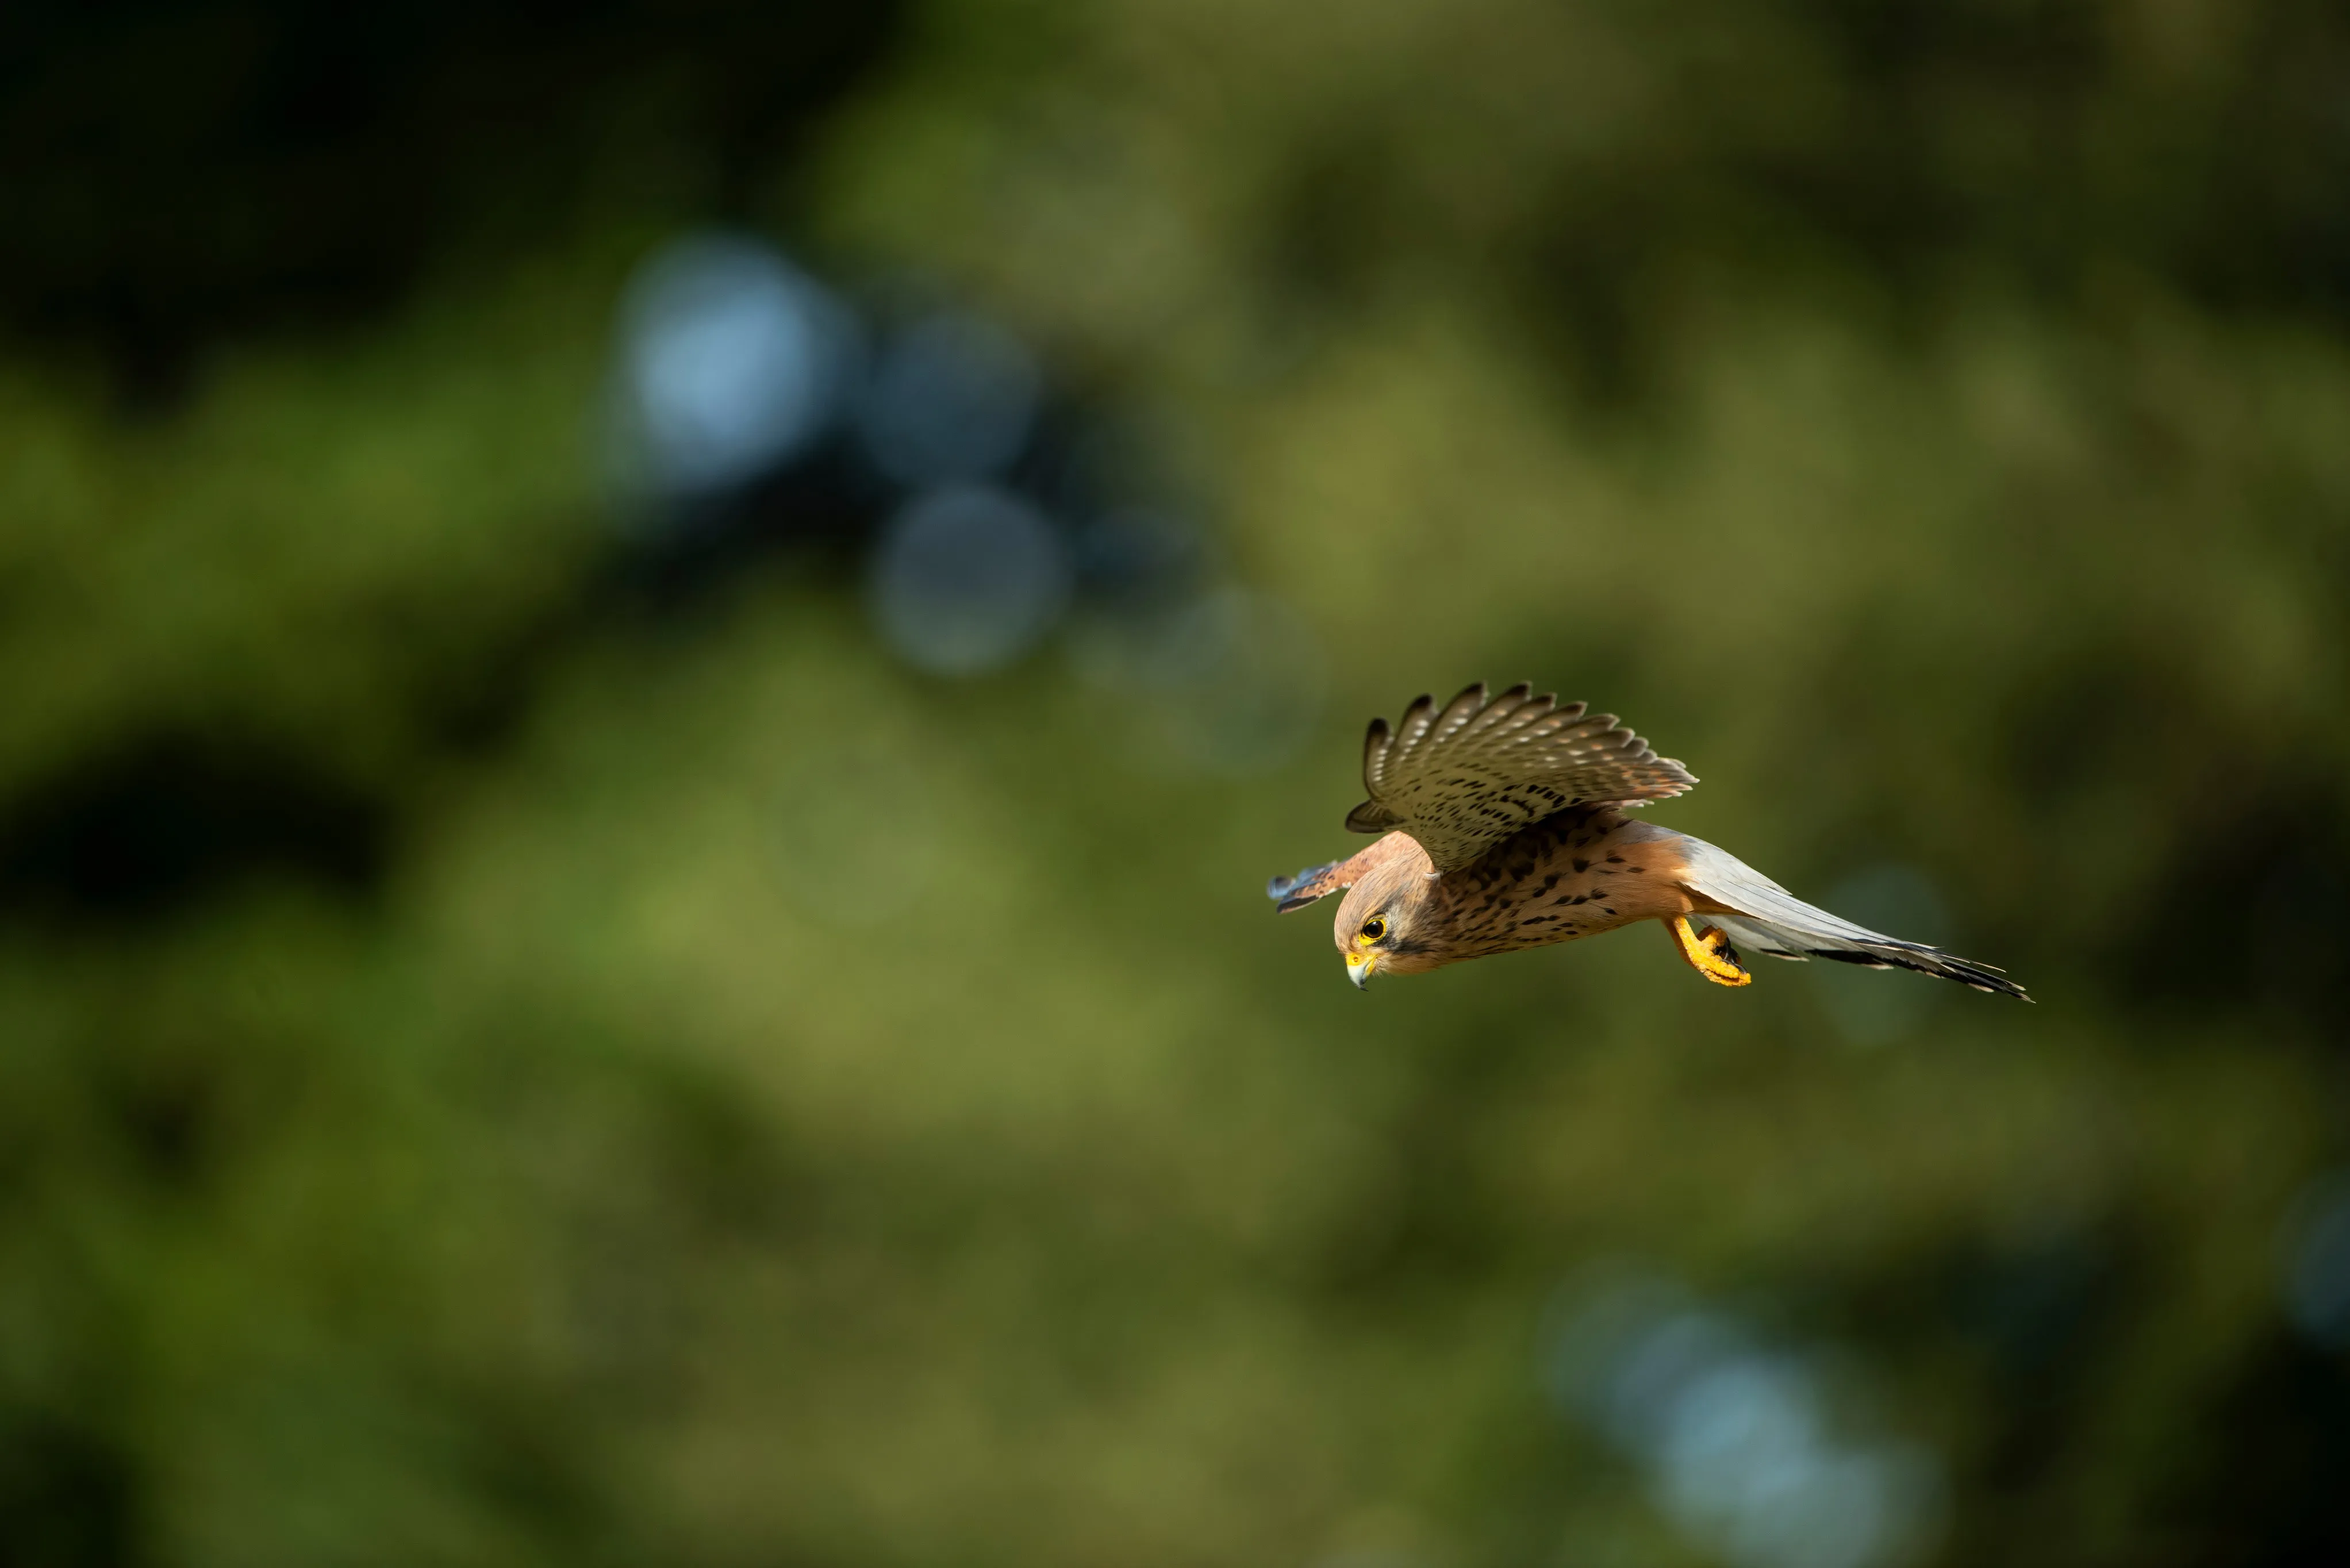 A Common Kestrel hovering in search of prey.